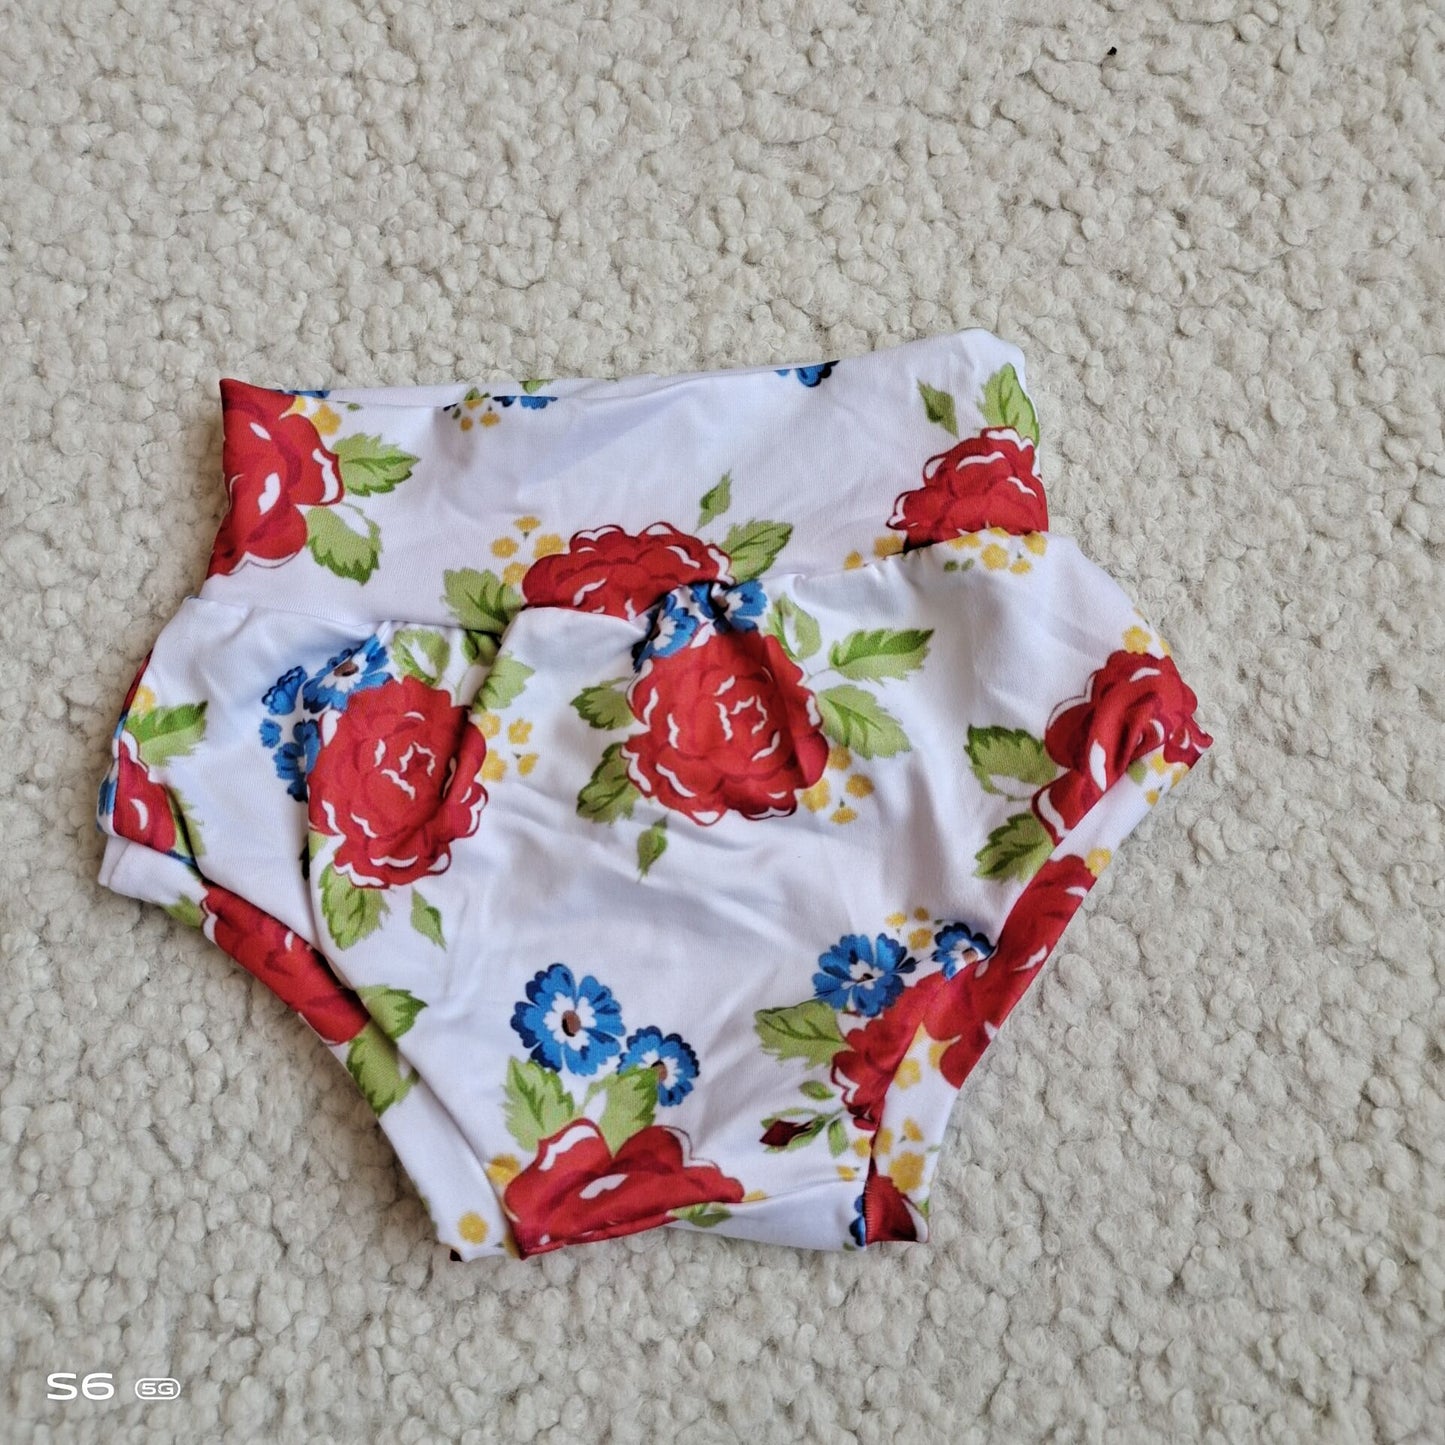 G2-4-9*= Red and blue floral thong